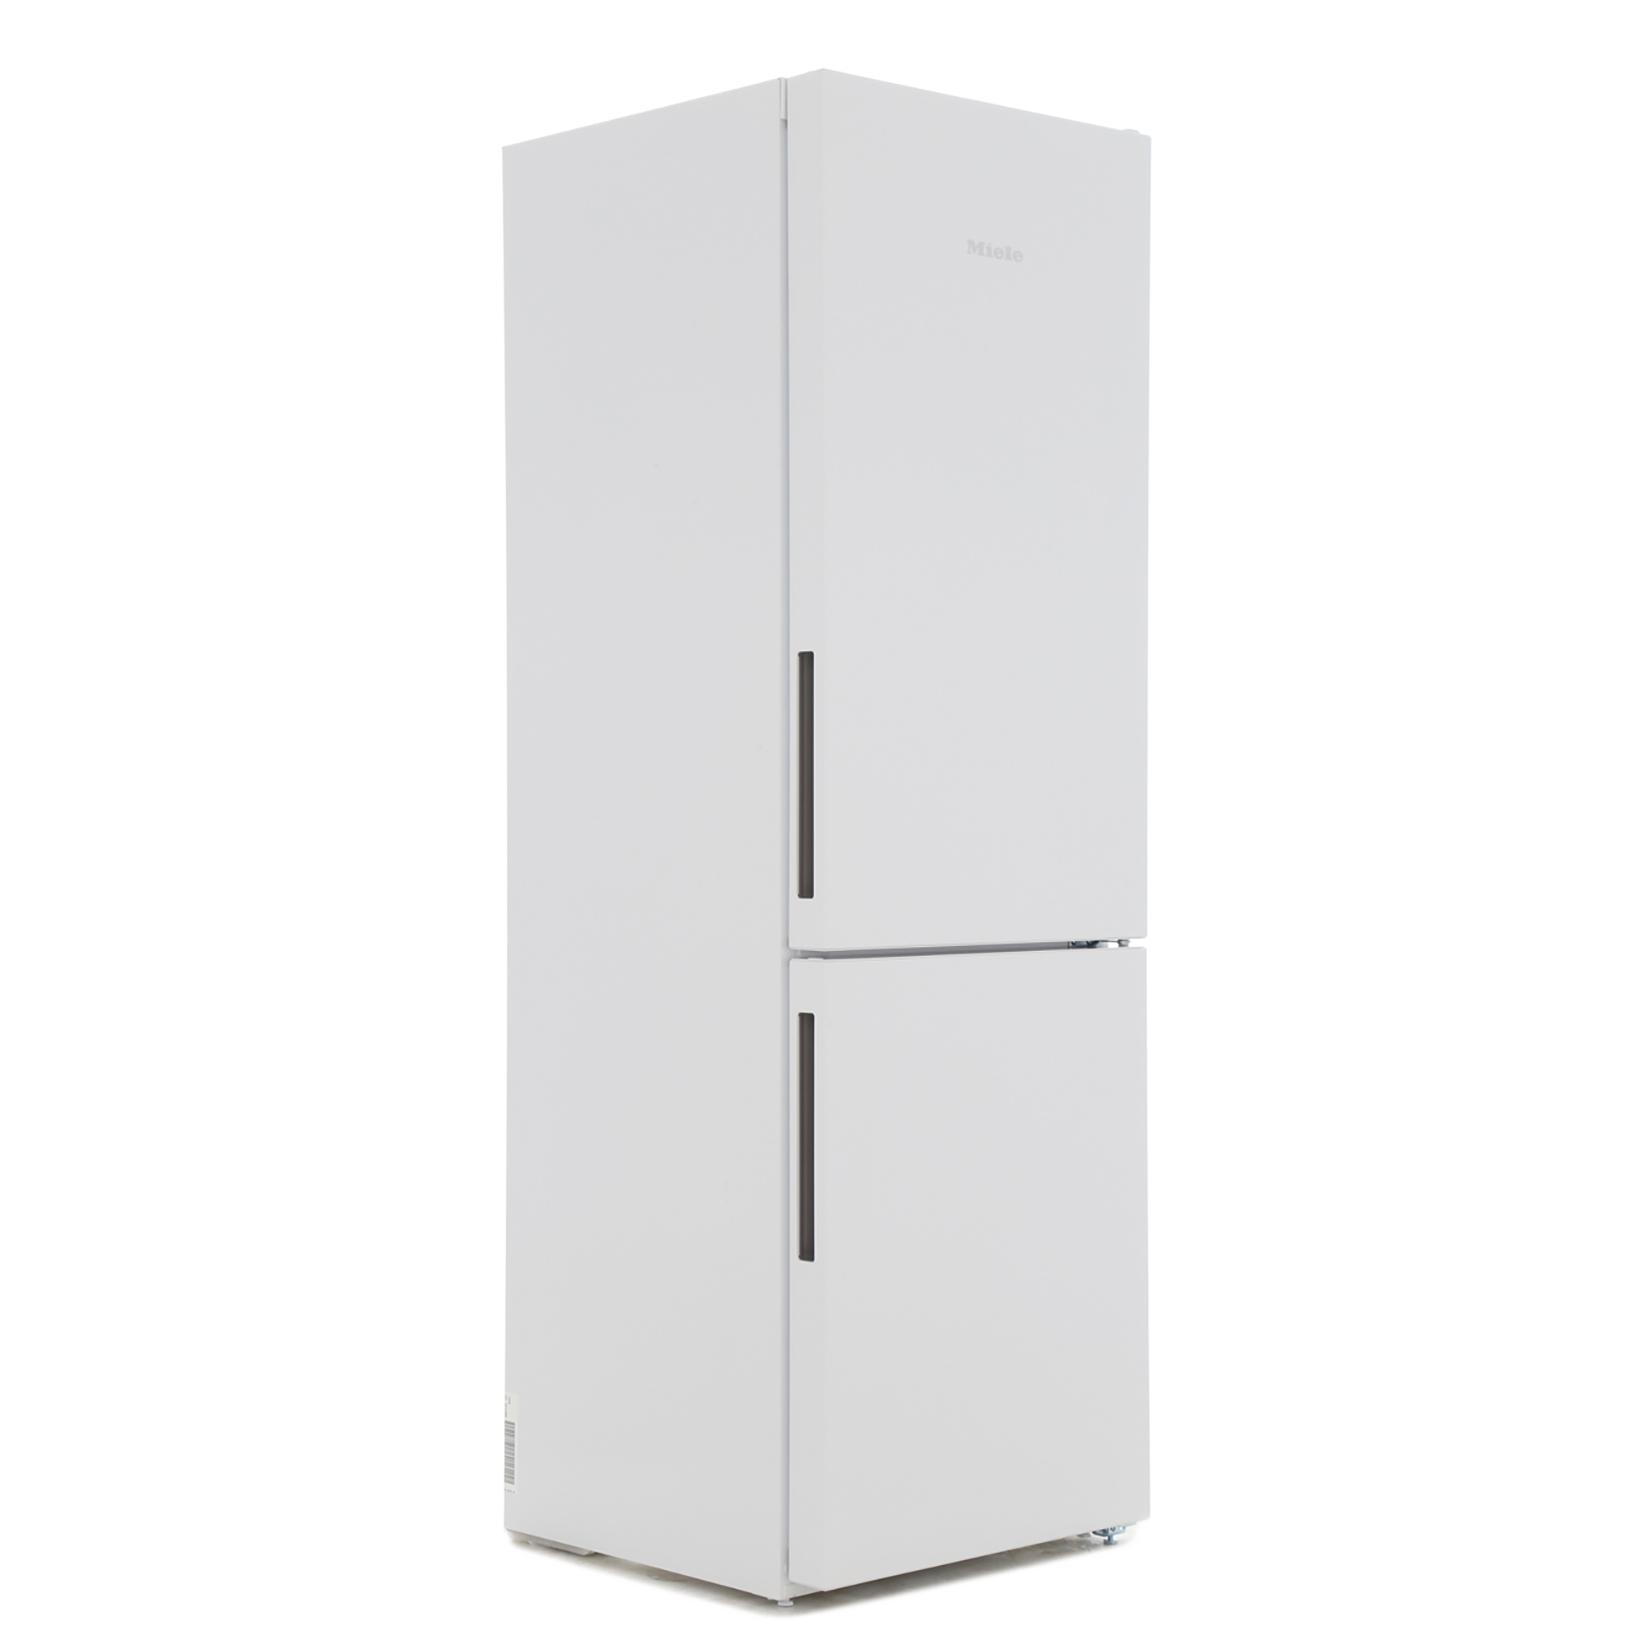 Miele KFN28132D Freestanding Frost Free Fridge Freezer with Dynamic Cooling-White